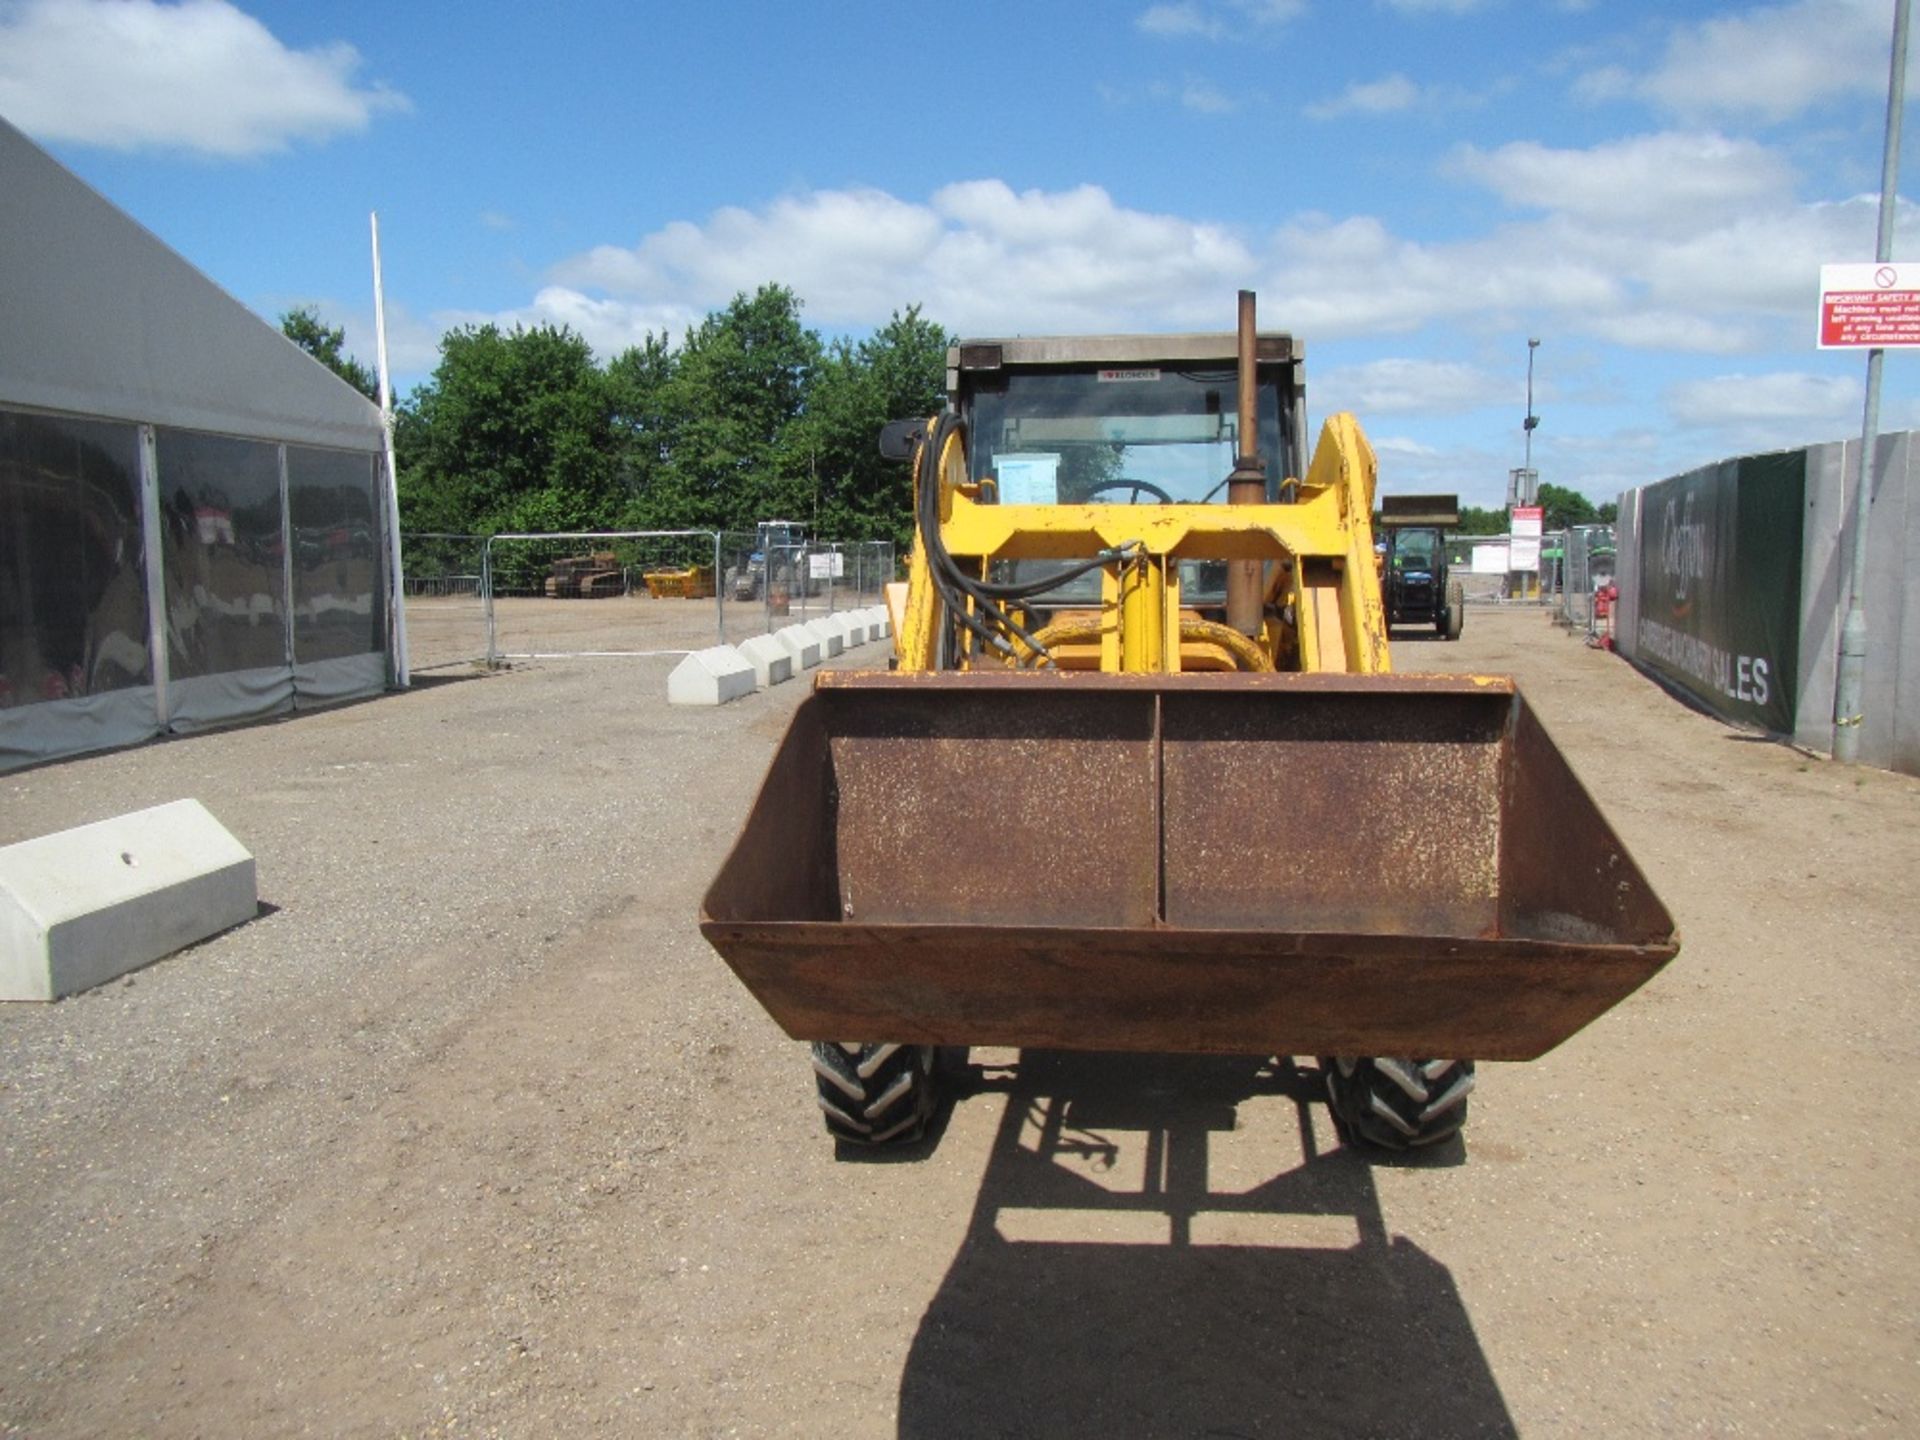 Renault 68-14 4wd Tractor c/w Grays loader & bucket Reg. No. C421 SSS UNRESERVED LOT - Image 2 of 16